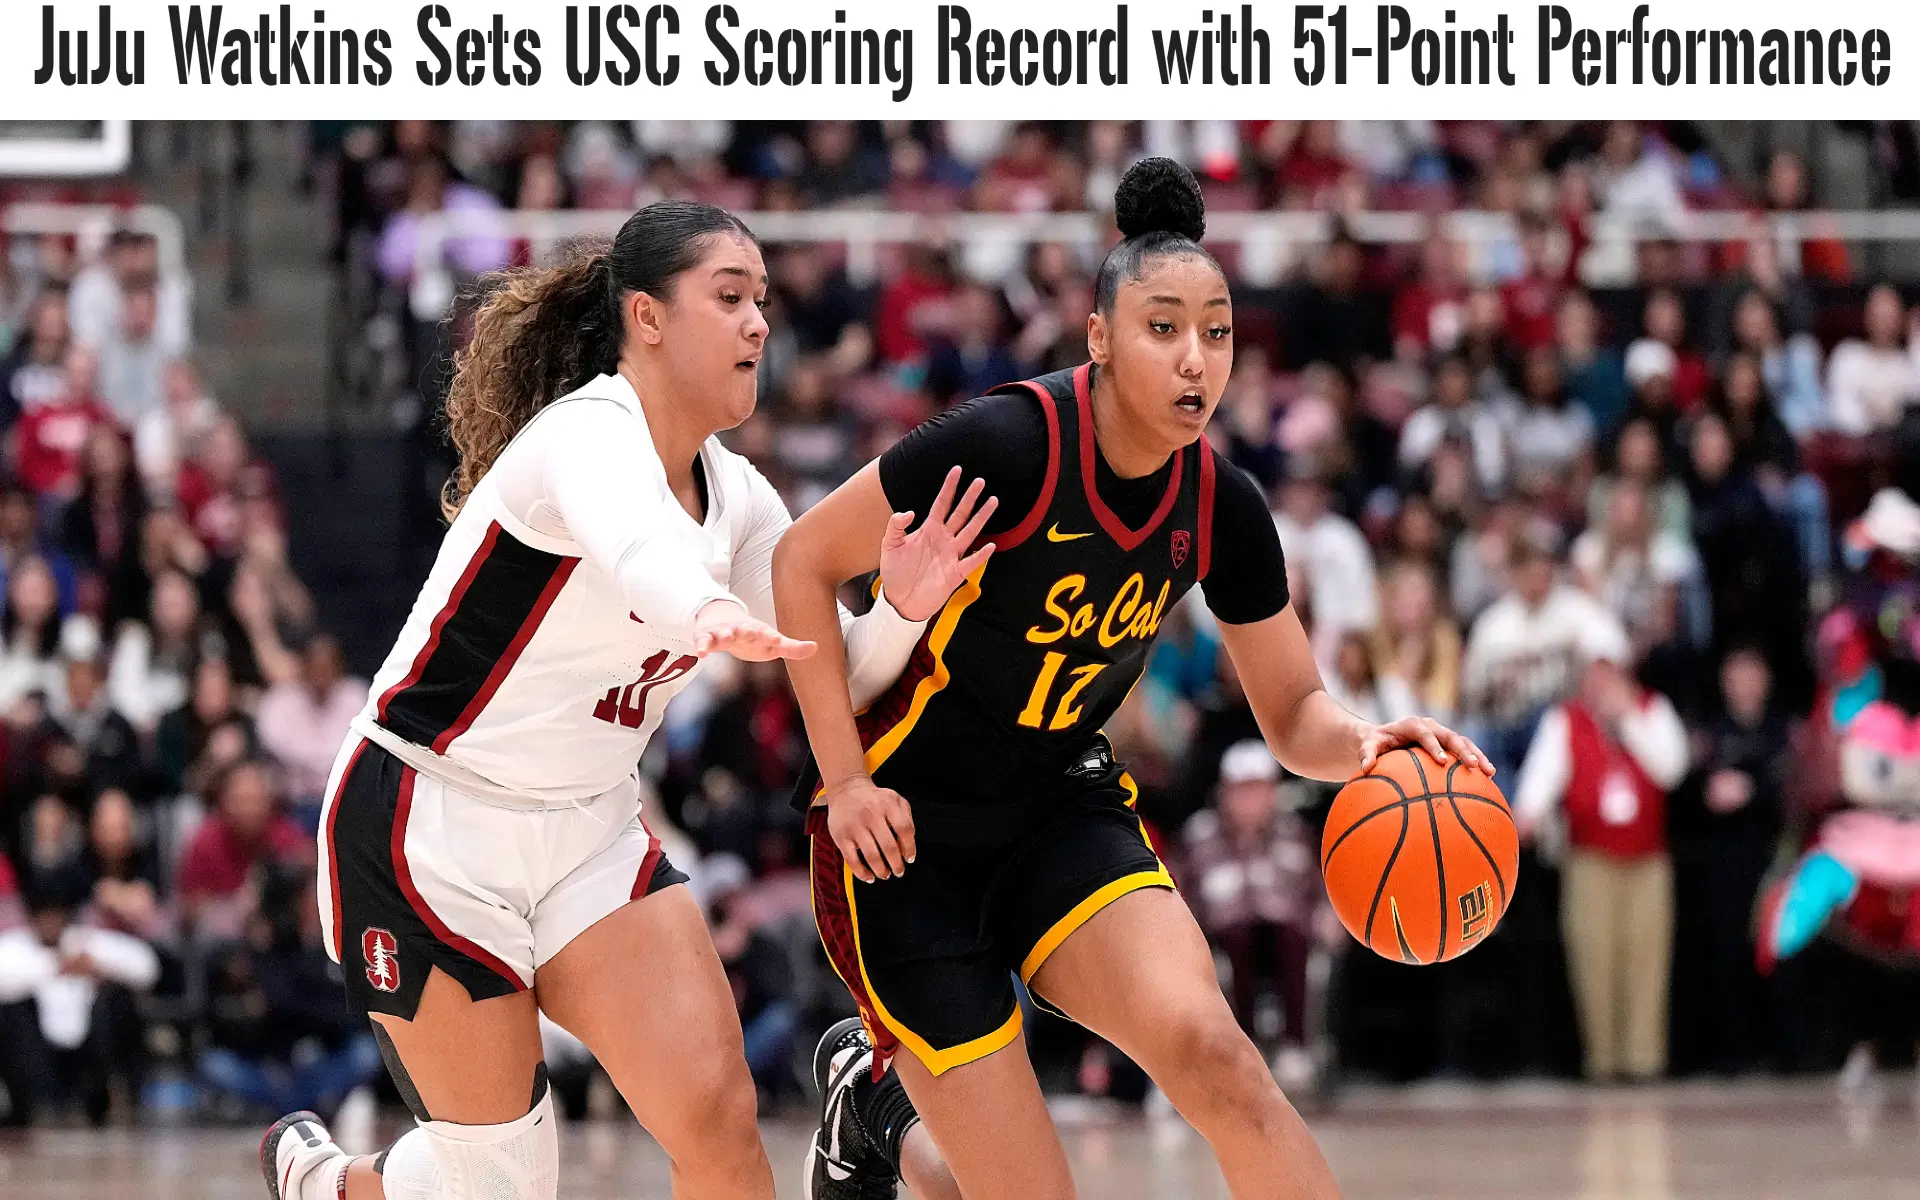 JuJu Watkins Dominates with 51 Points in USC Upset Win